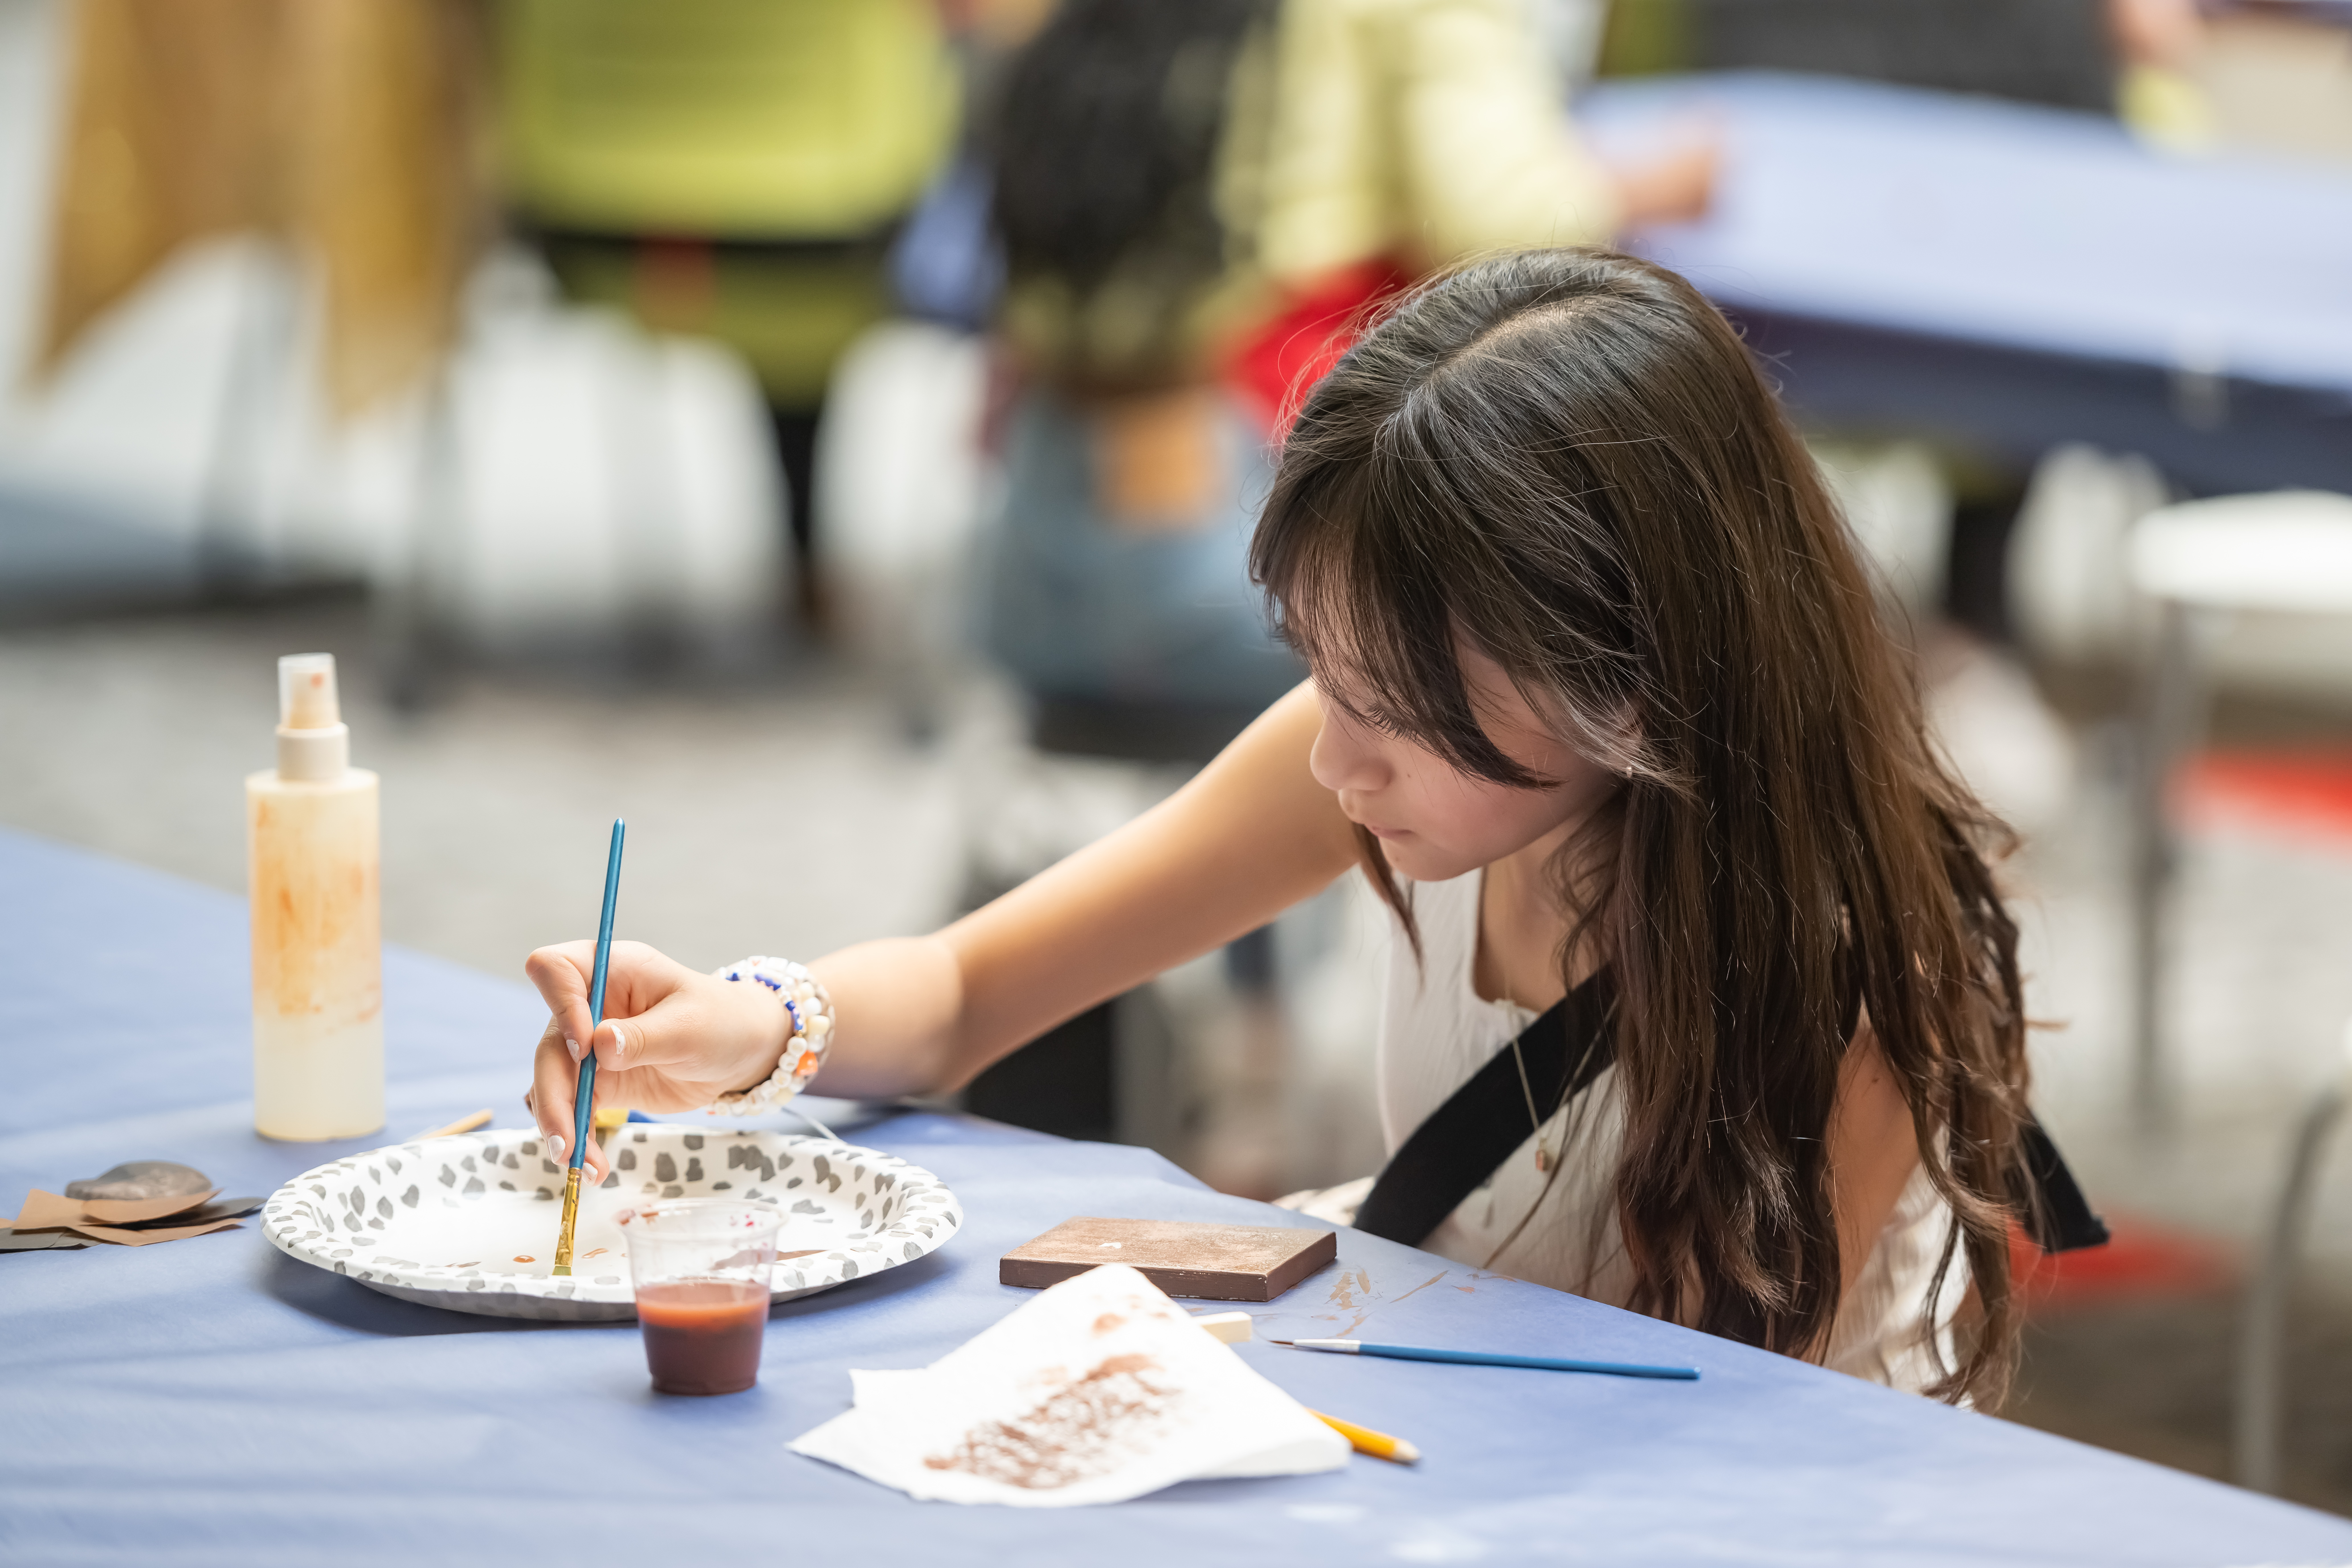 Young light skinned participant with long hair mixing watercolors on a table using a disposable plate to use on a painting she is making.